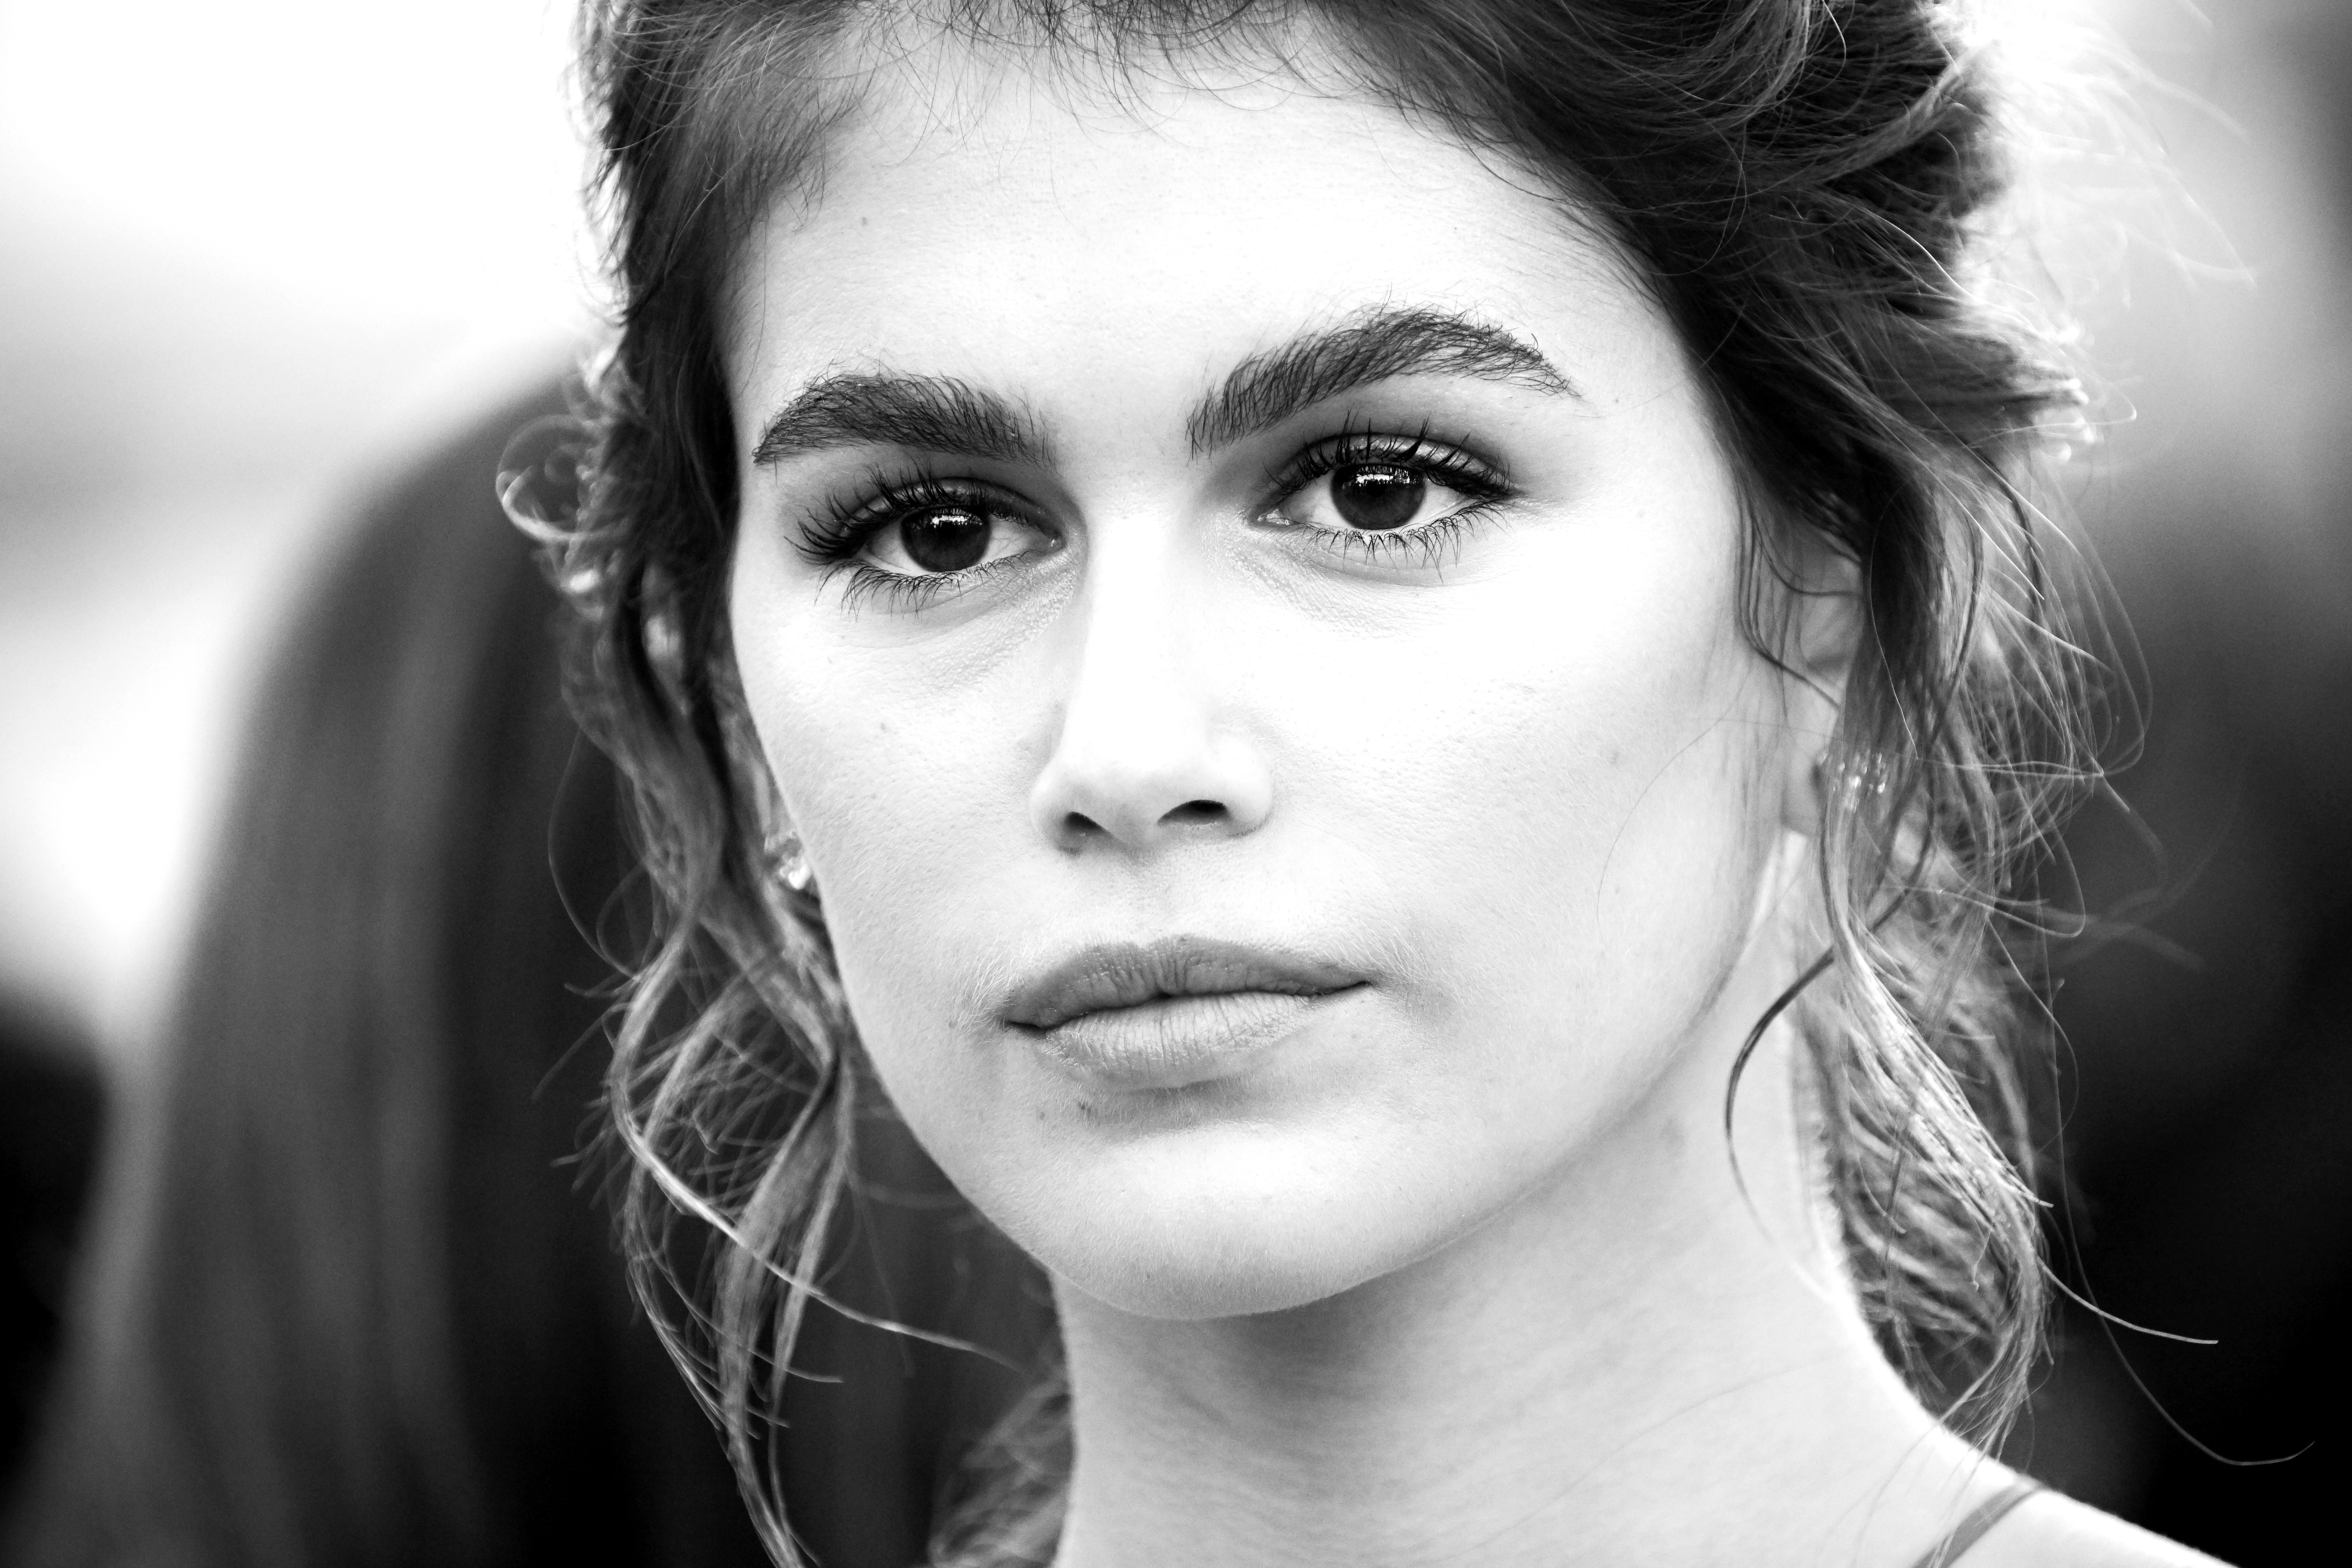 Kaia Gerber at the screening of "Elvis" during the 75th annual Cannes film festival at Palais des Festivals on May 25, 2022 in Cannes, France | Source: Getty Images